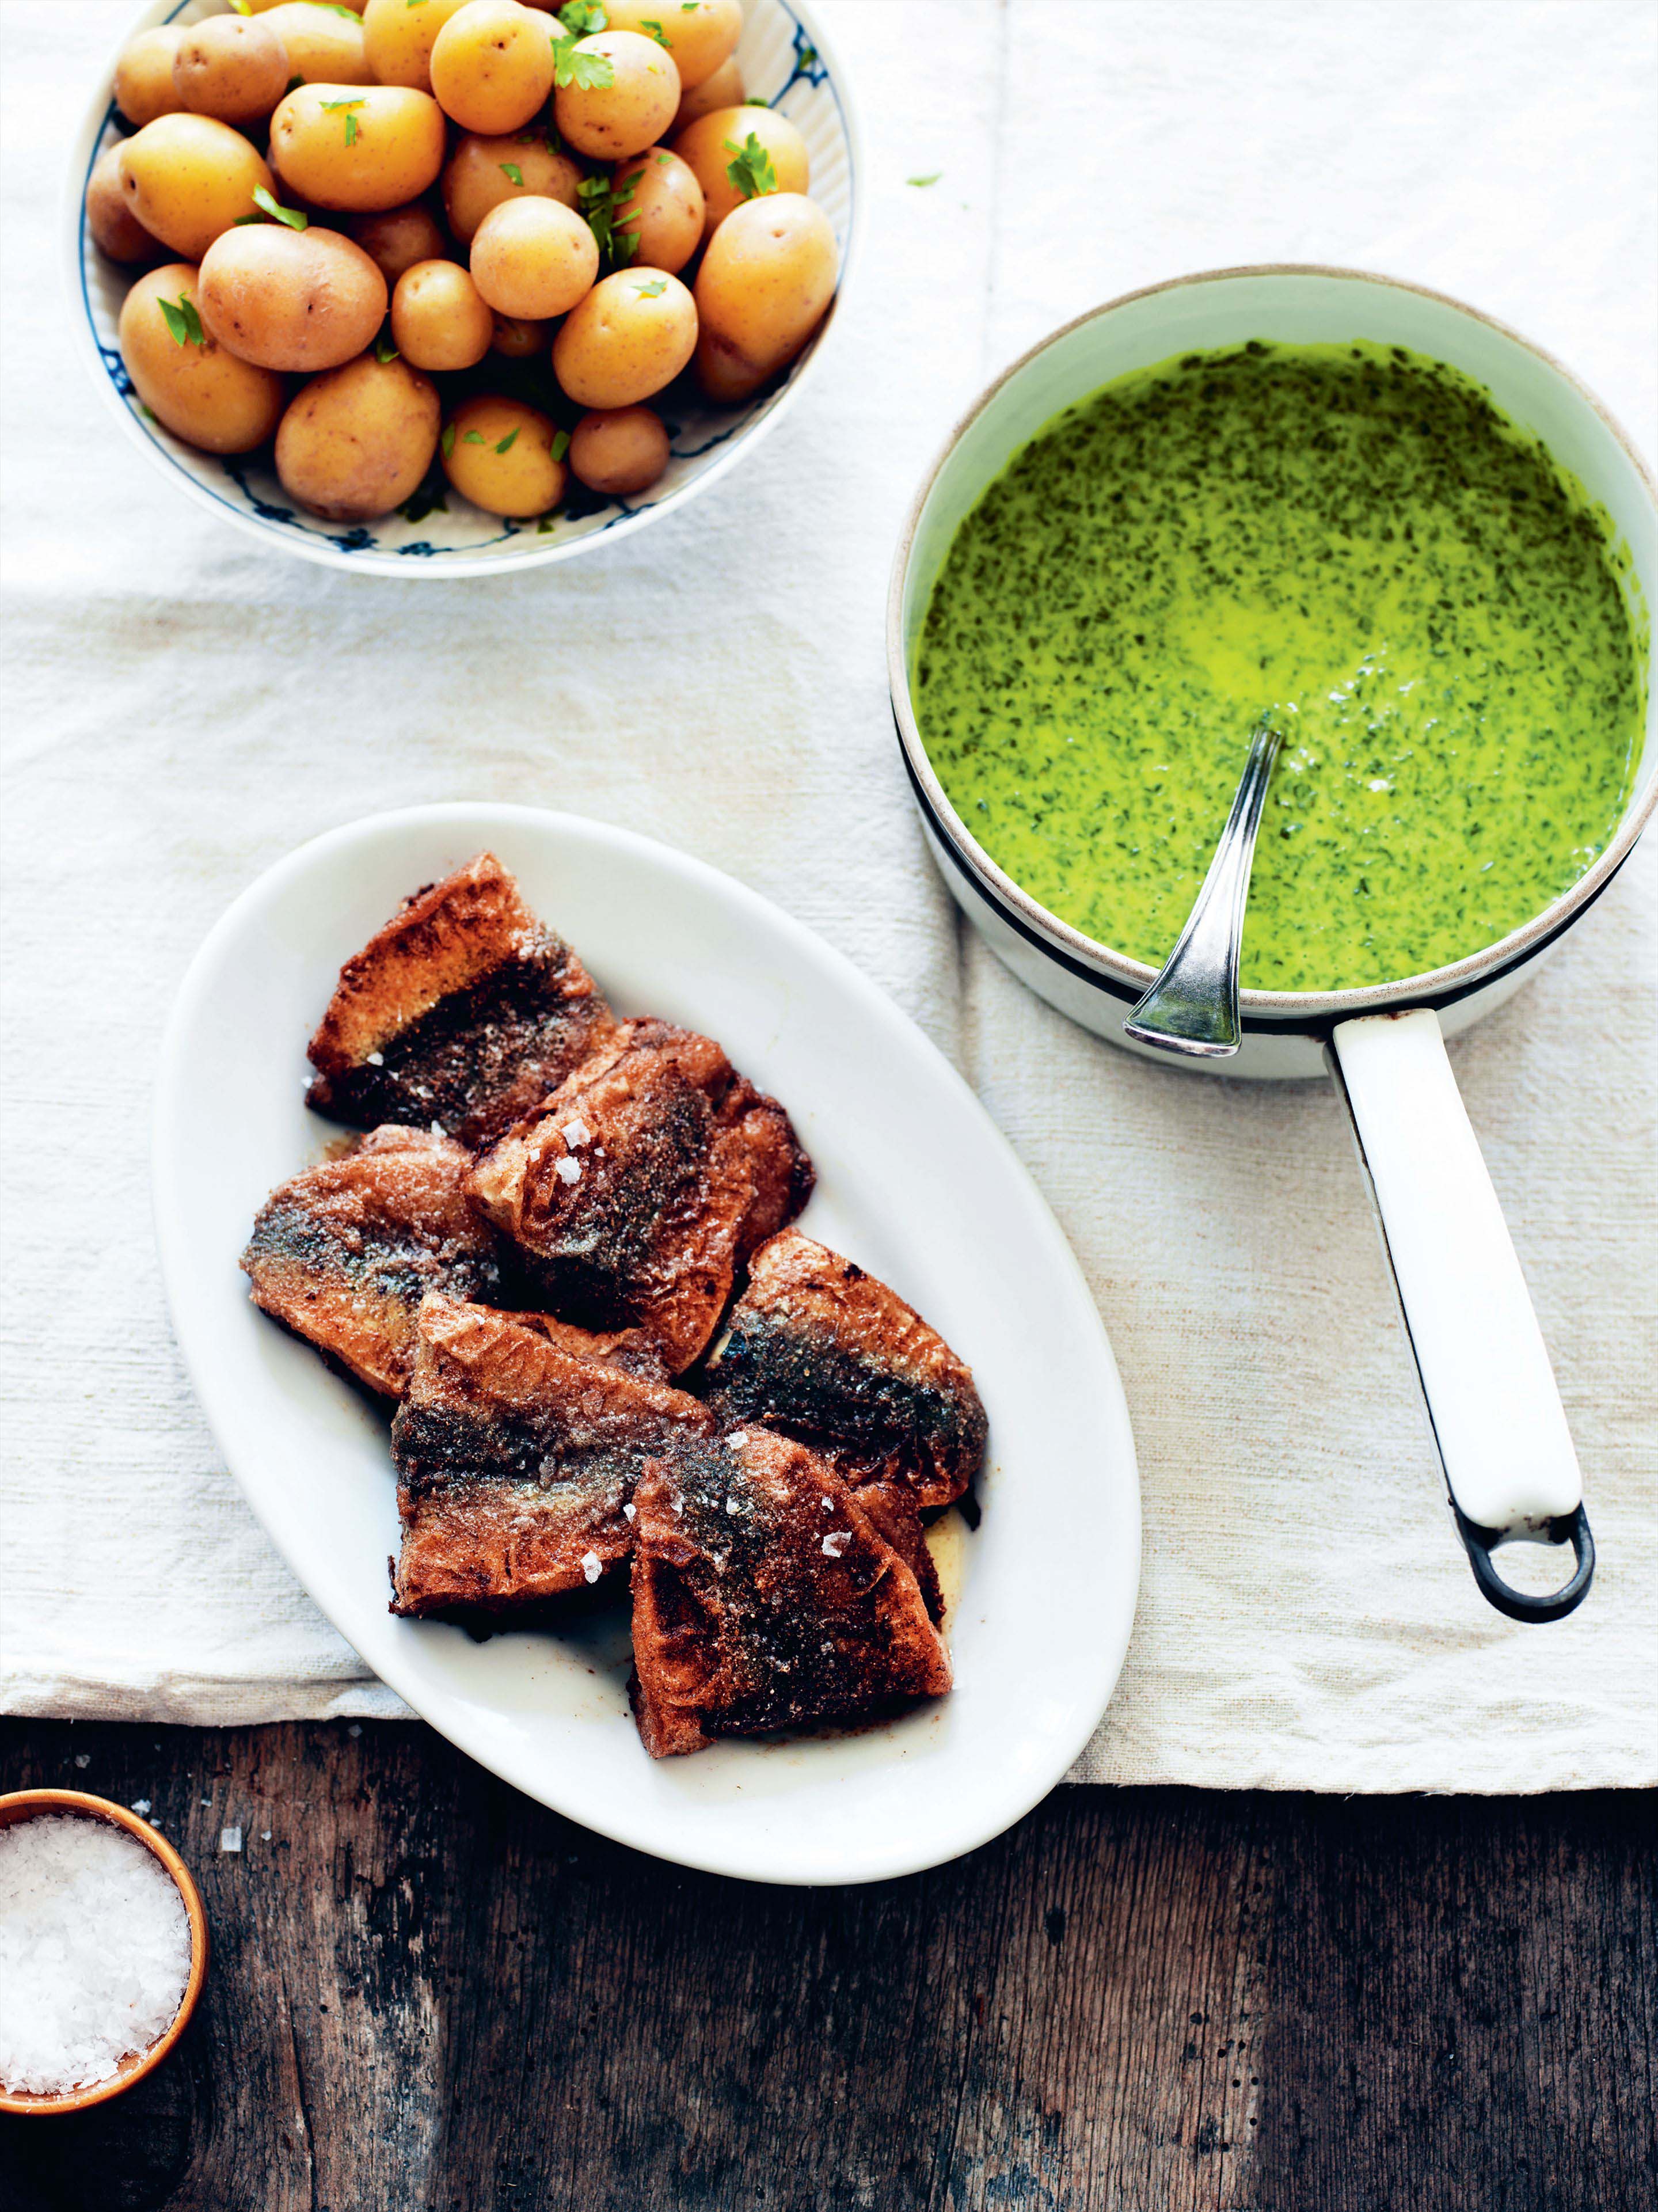 Pan-fried herrings with new potatoes and parsley sauce